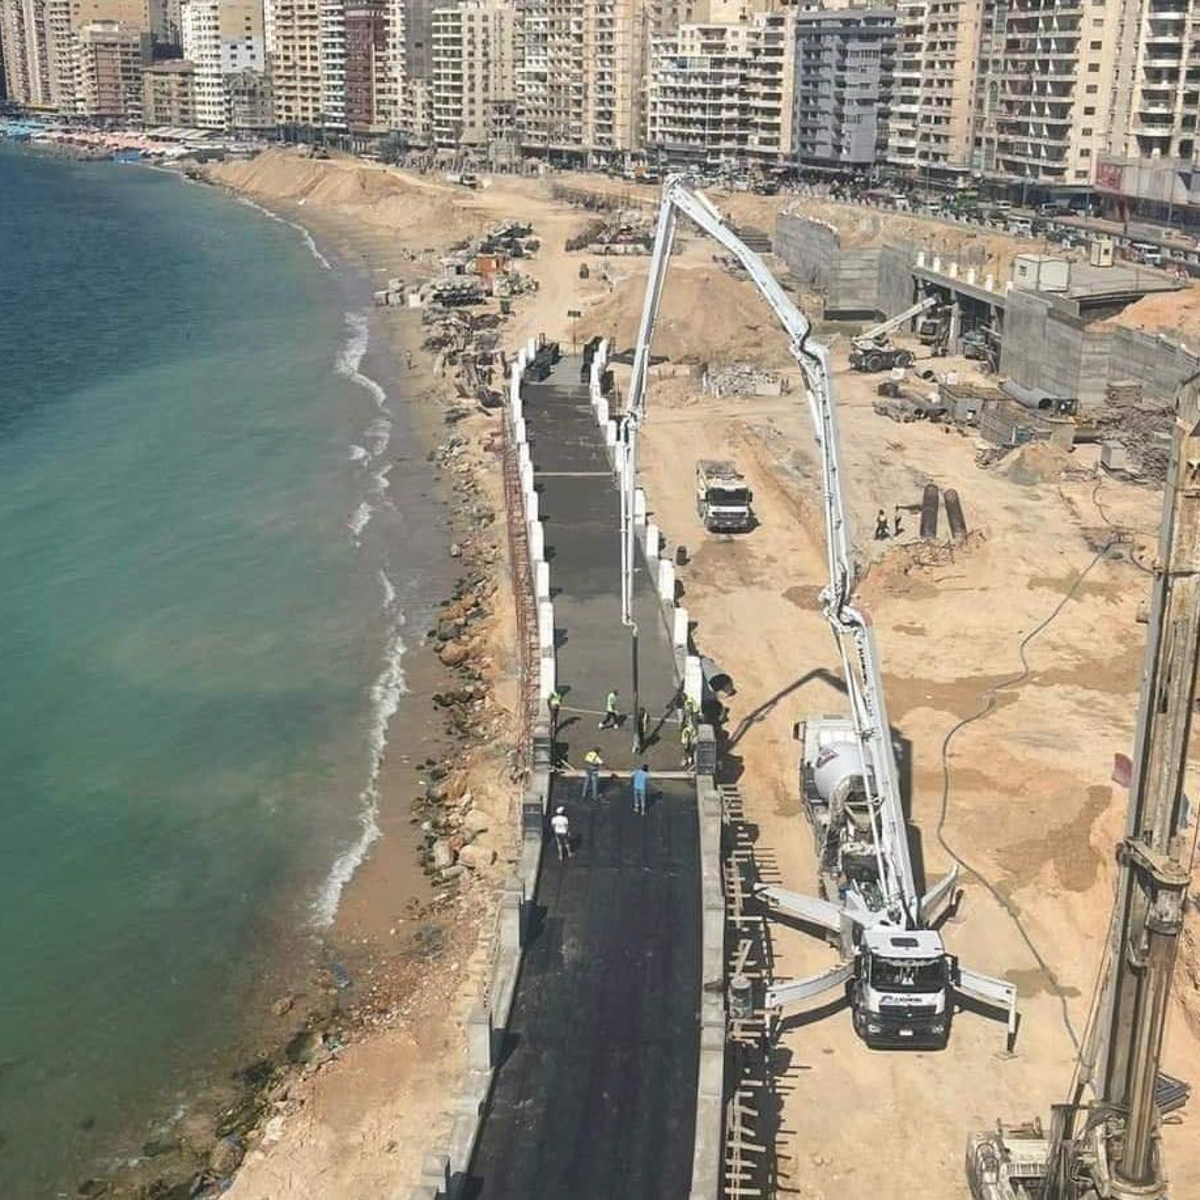 Construction taking place on road next to beach in Alexandria, Egypt